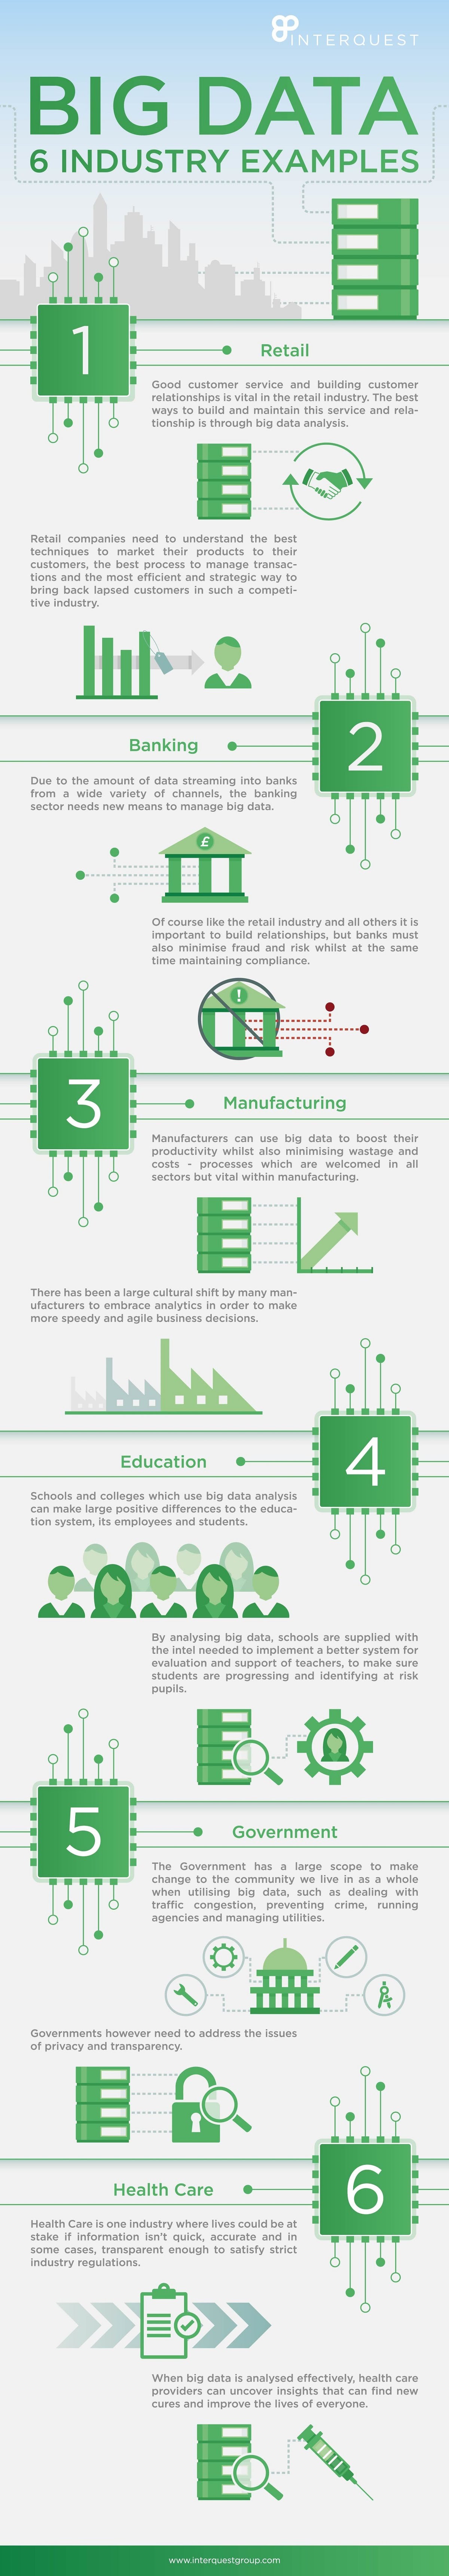 Big Data: 6 Industry Examples #Infographic